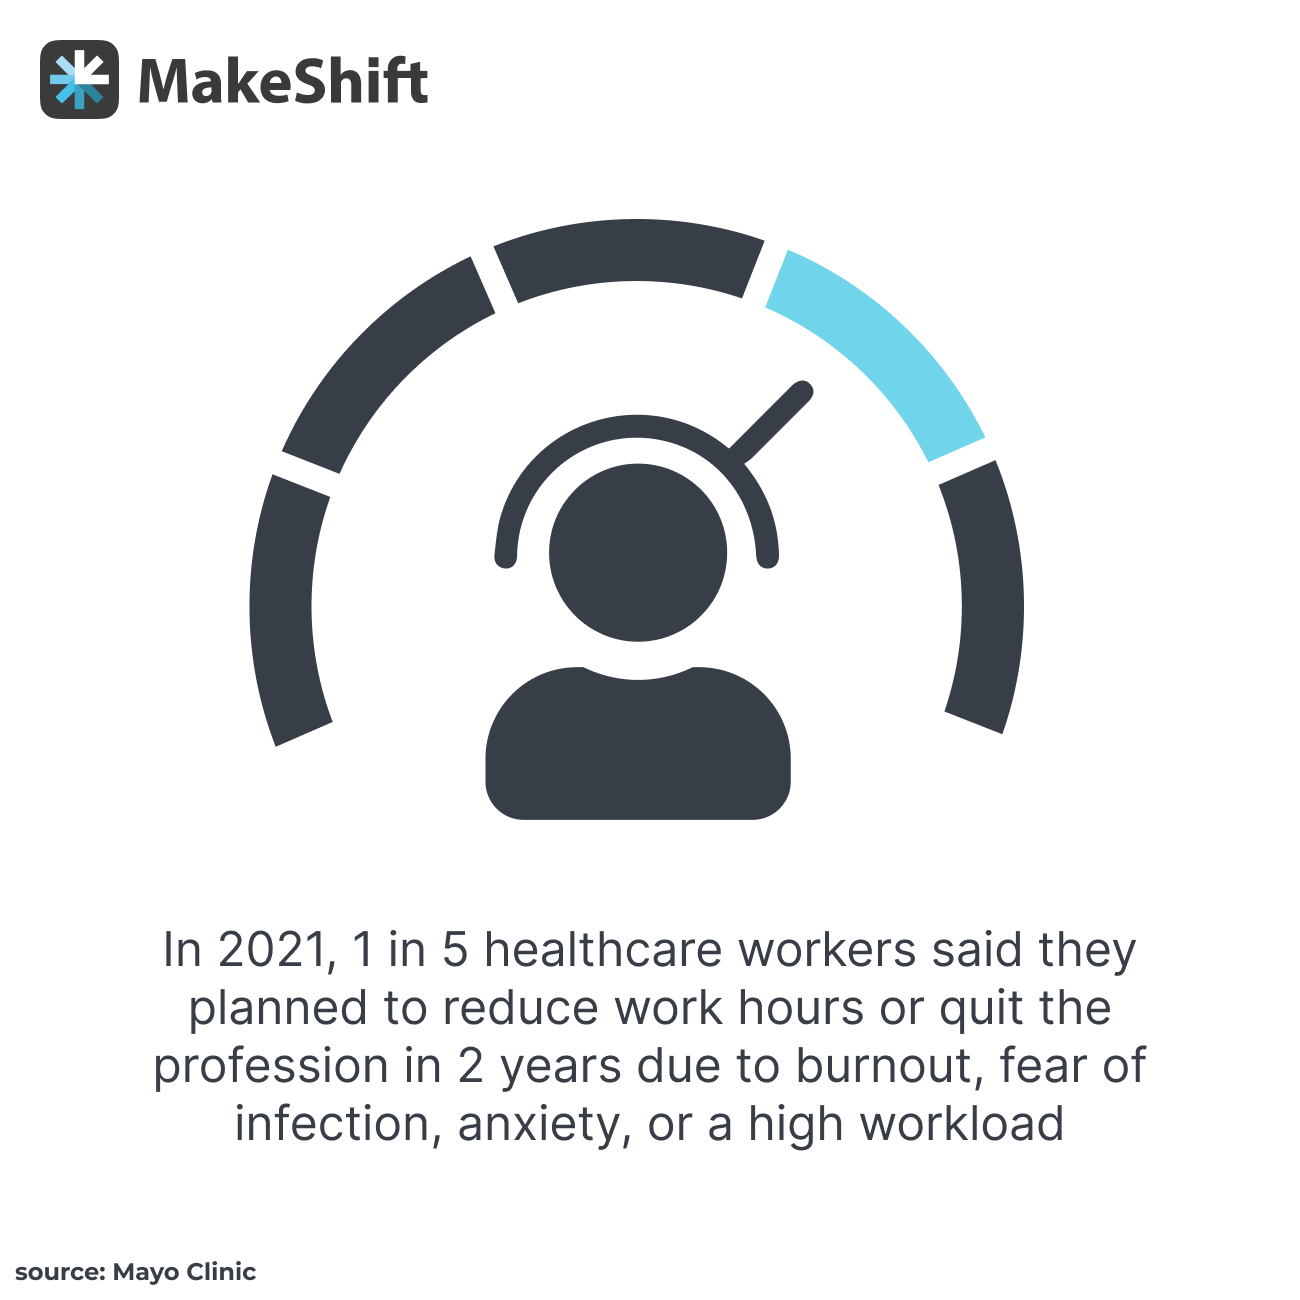 1 in 5 healthcare workers said they planned to cut back their work hours or leave the profession within the next 2 years